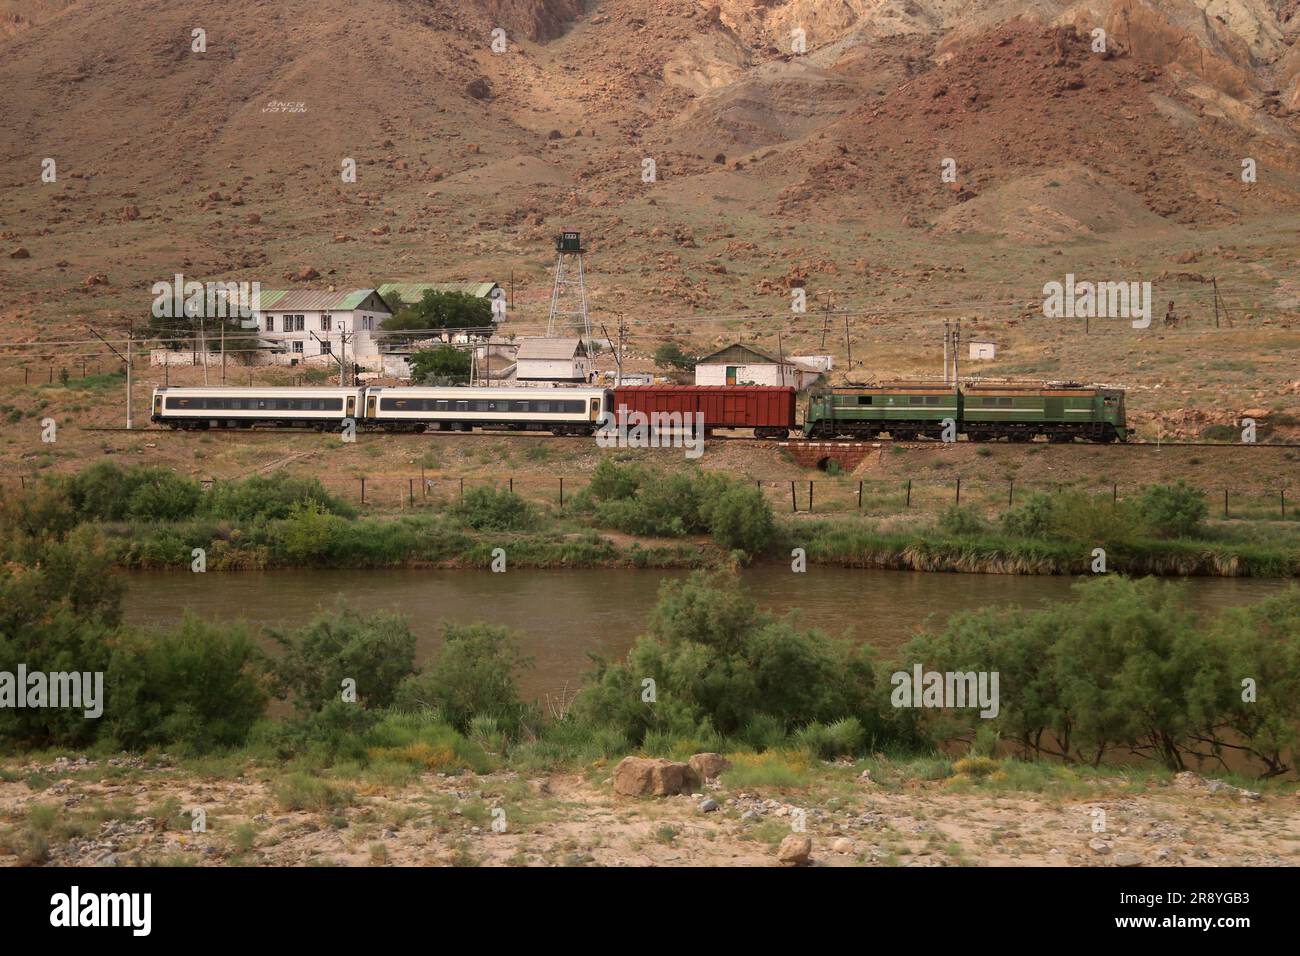 June 21, 2023, Jolfa, East Azerbaijan, Iran: A train stop at a Railway station near the Aras River at the border between northwestern Iran and Azerbaijan. The Aras (the Araks, Arax, Araxes, or Araz) is a river in the Caucasus. It rises in eastern Turkey and flows along the borders between Turkey and Armenia, between Turkey and the Nakhchivan exclave of Azerbaijan, between Iran and both Azerbaijan and Armenia, and, finally, through Azerbaijan where it flows into the Kura River. It drains the south side of the Lesser Caucasus Mountains while the Kura drains the north side of the Lesser Caucasus. Stock Photo